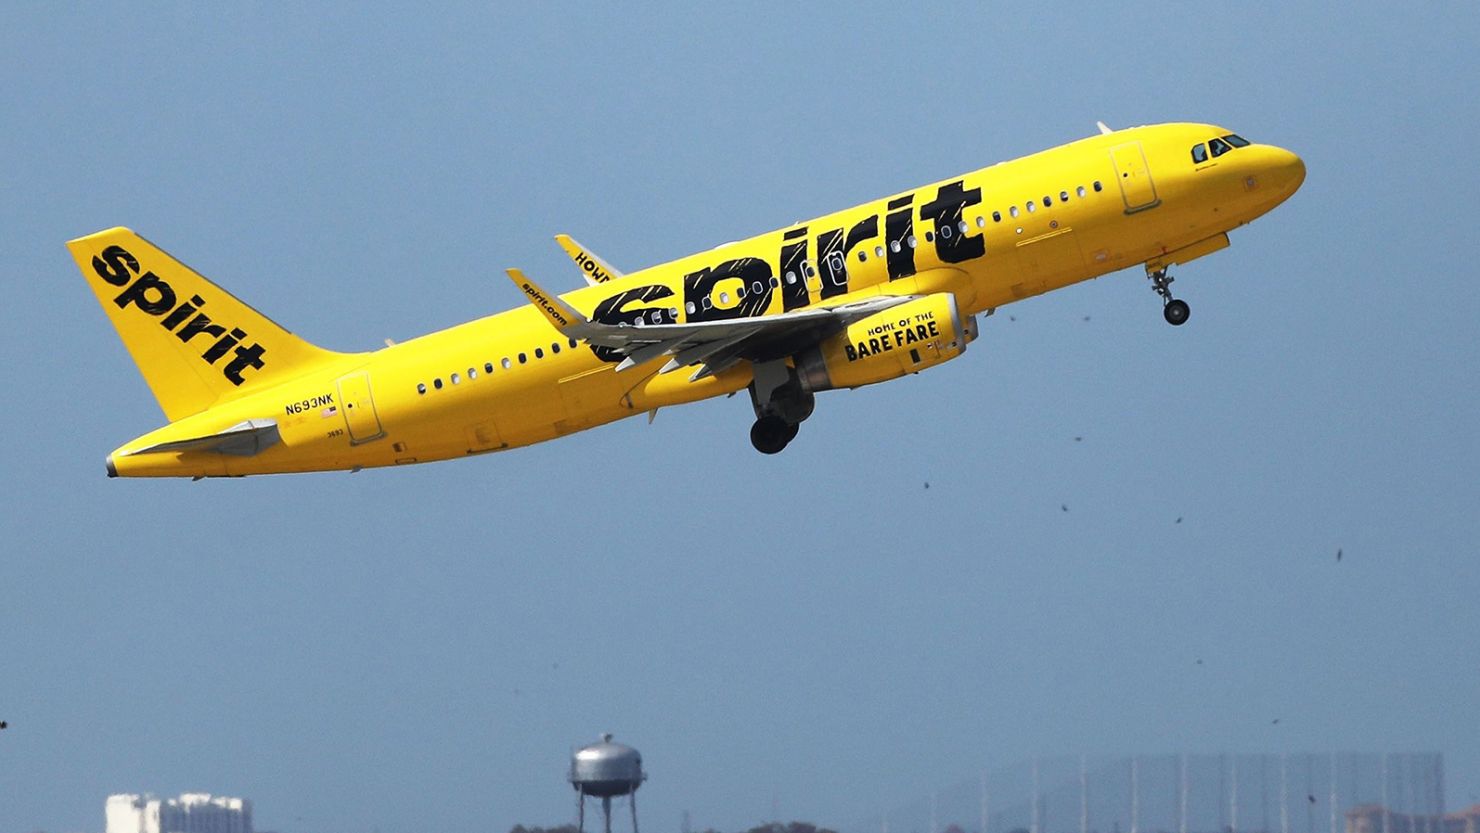 A Spirit Airlines Airbus A320-232 takes off at the Orlando International Airport in November 2020. The budget airline is weighing competing takeover offers from JetBlue Airways of New York and Frontier Airlines of Denver. A sale to either will have an impact on employees, local facilities and the traveling public. (